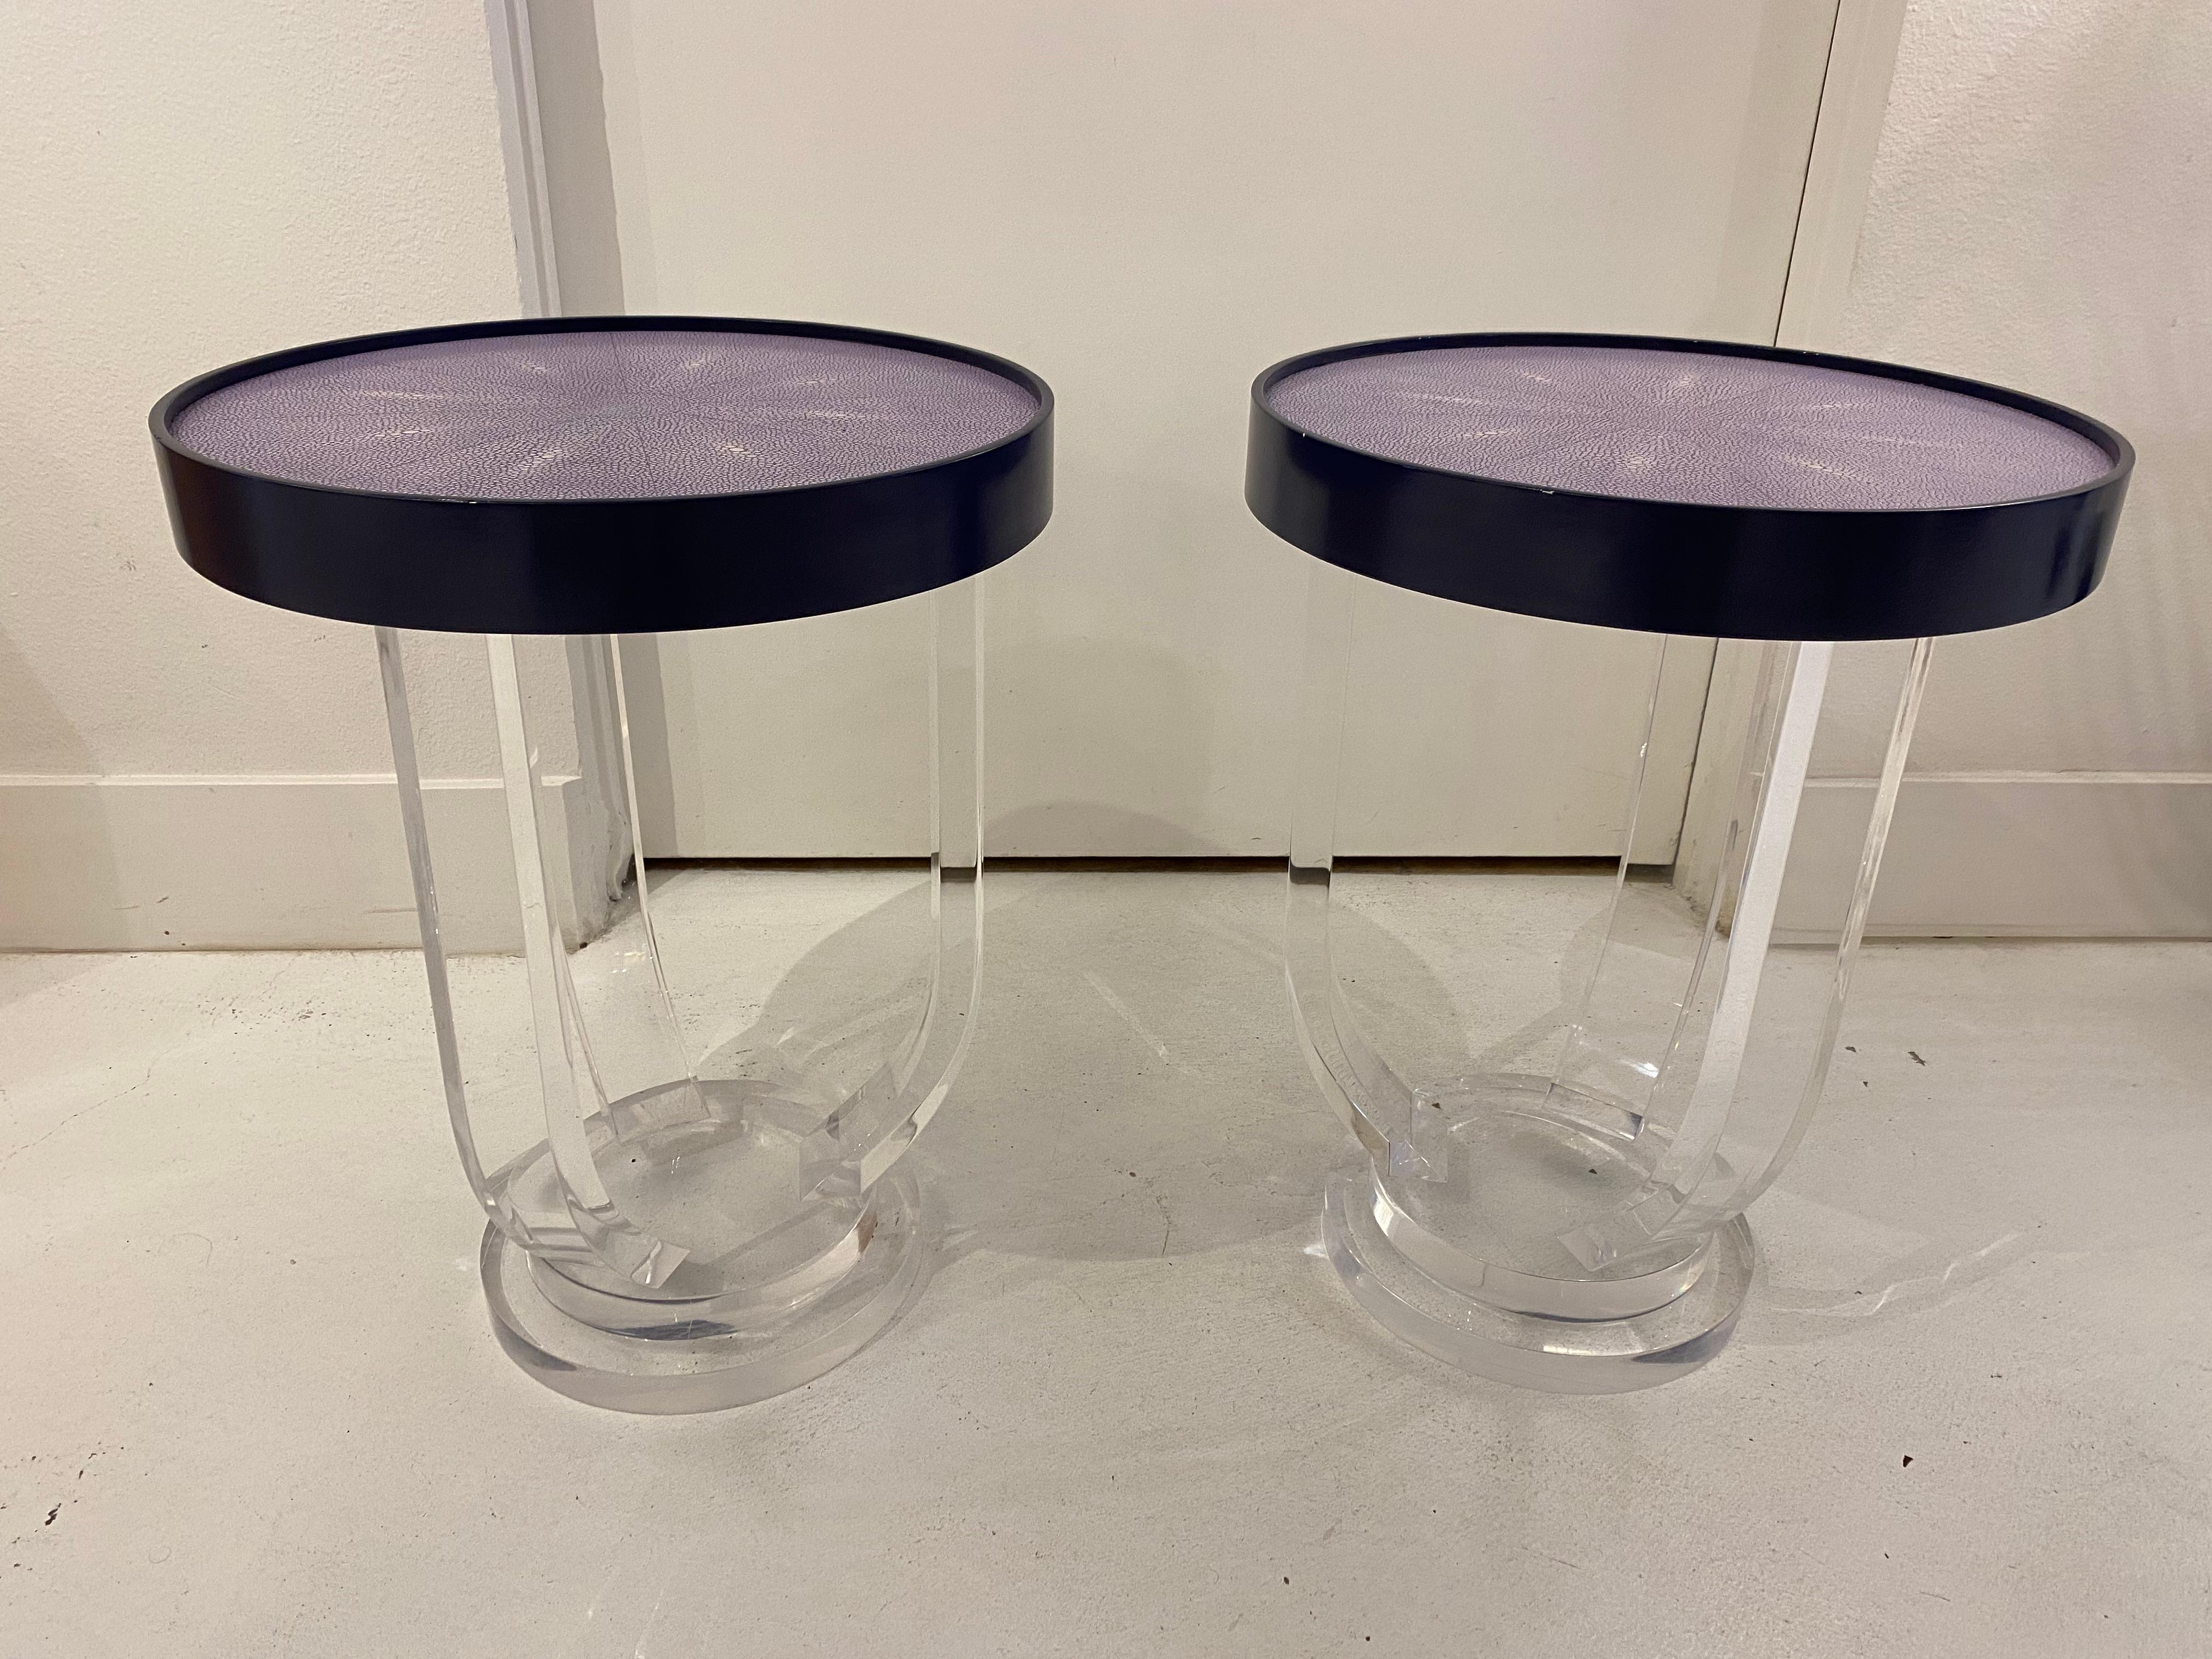 Here is a pair of faux shagreen side tables with lucite bases. The color is a whimsical purple with ample opportunity for multiple shades with the faux shagreen. The shagreen is scored to create a pie like design, with 8 sections. From above one can